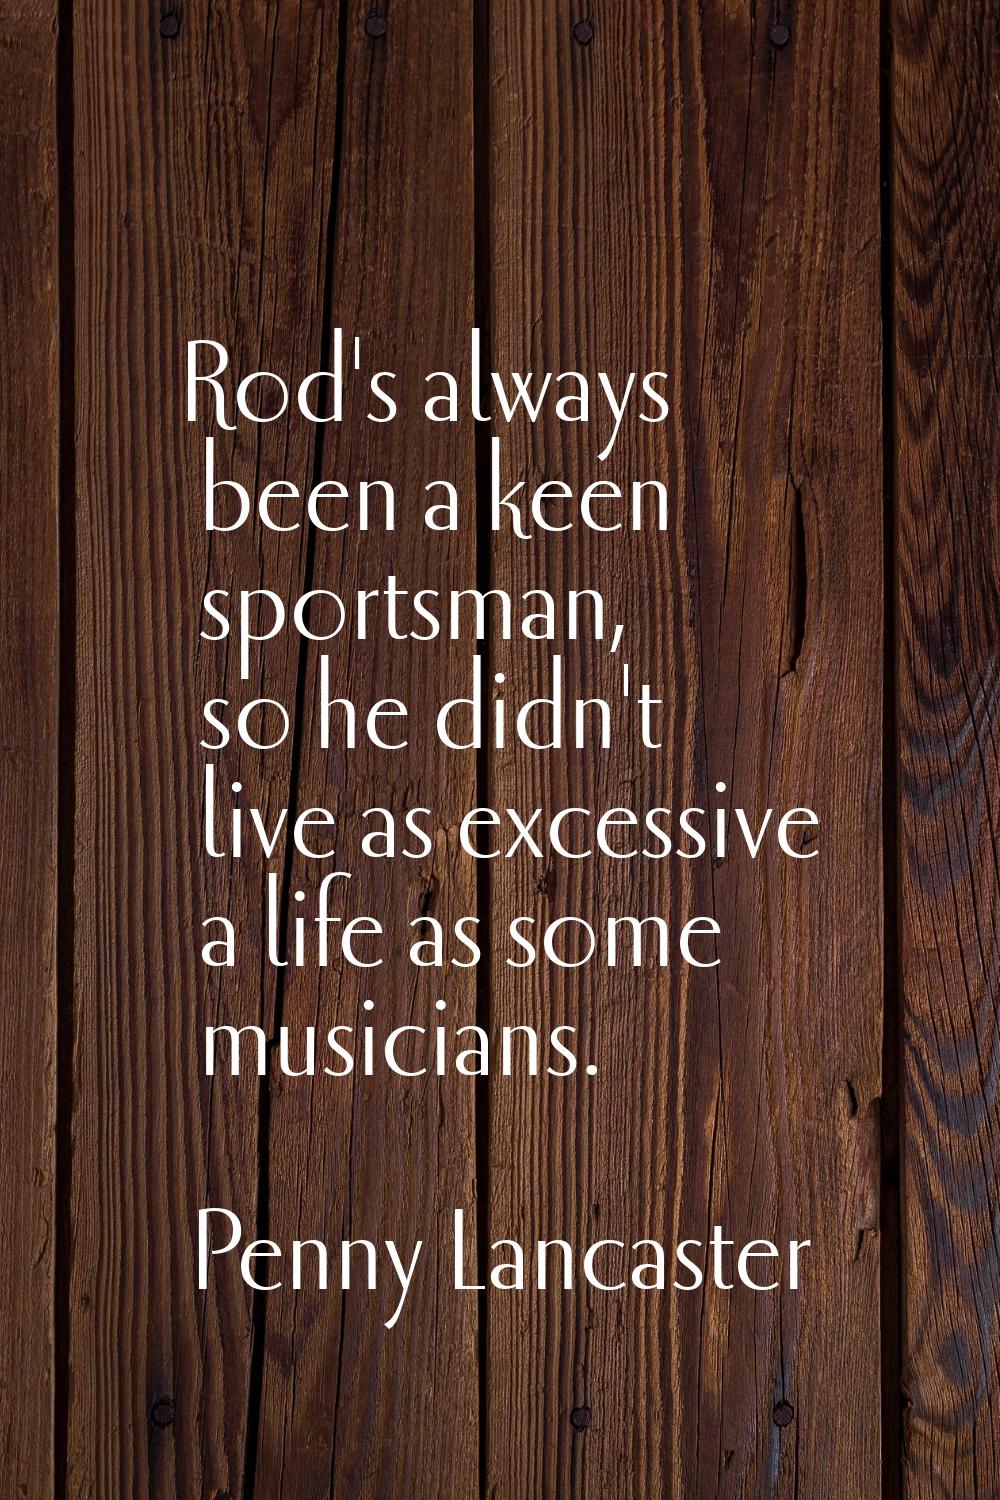 Rod's always been a keen sportsman, so he didn't live as excessive a life as some musicians.